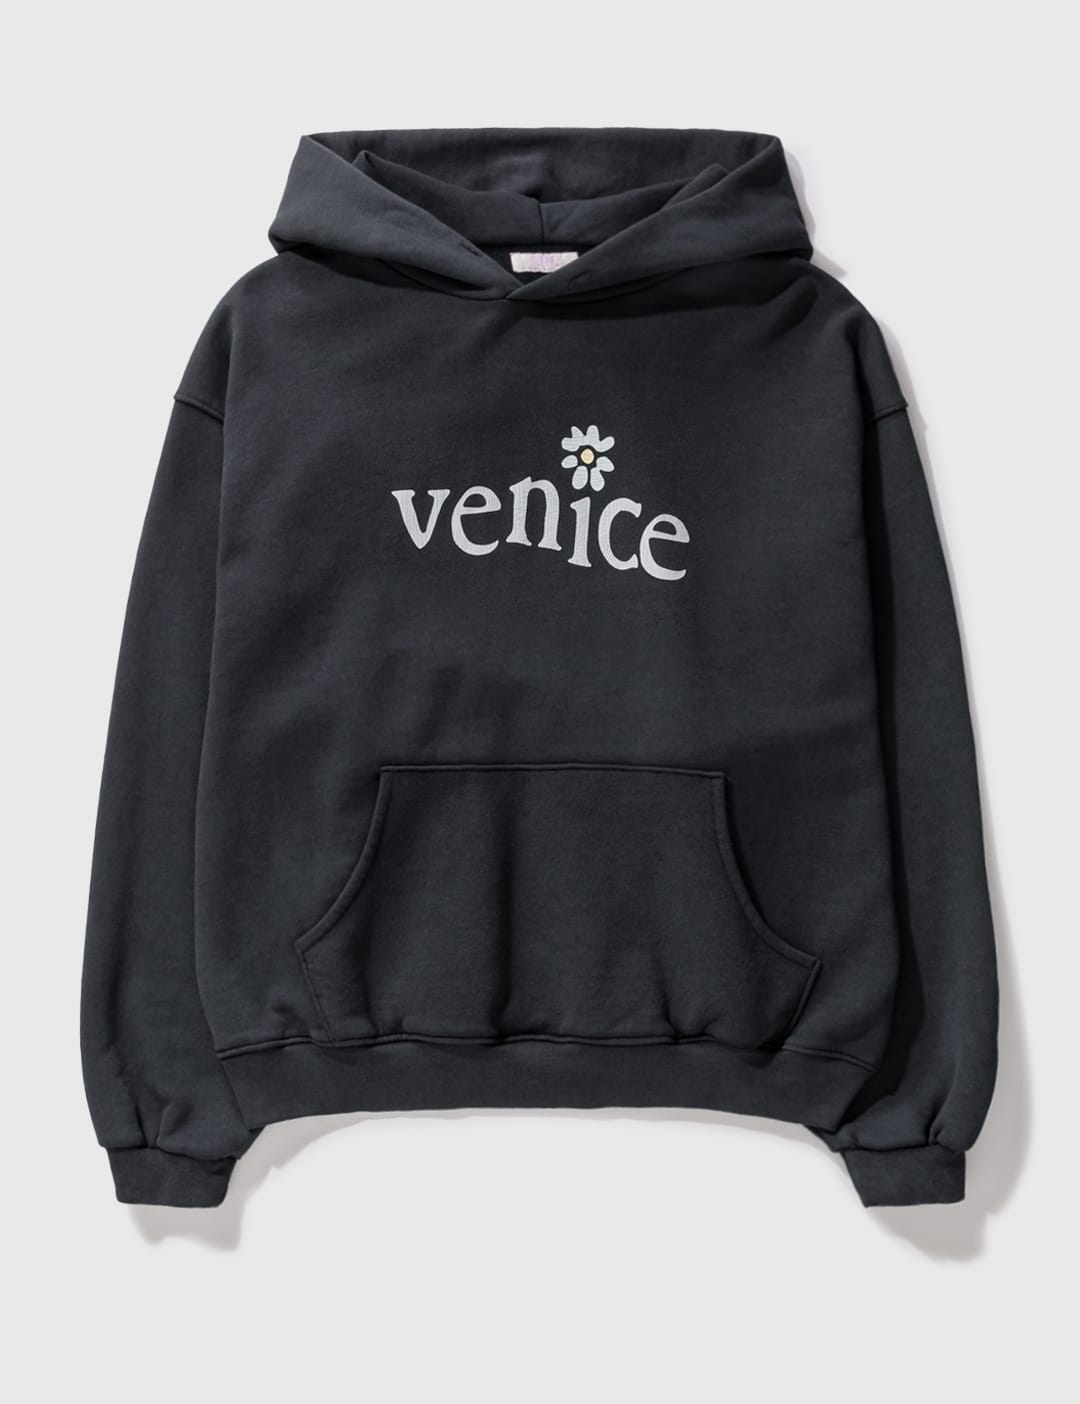 ERL - Venice Fleece Hoodie | HBX - Globally Curated Fashion and Lifestyle  by Hypebeast